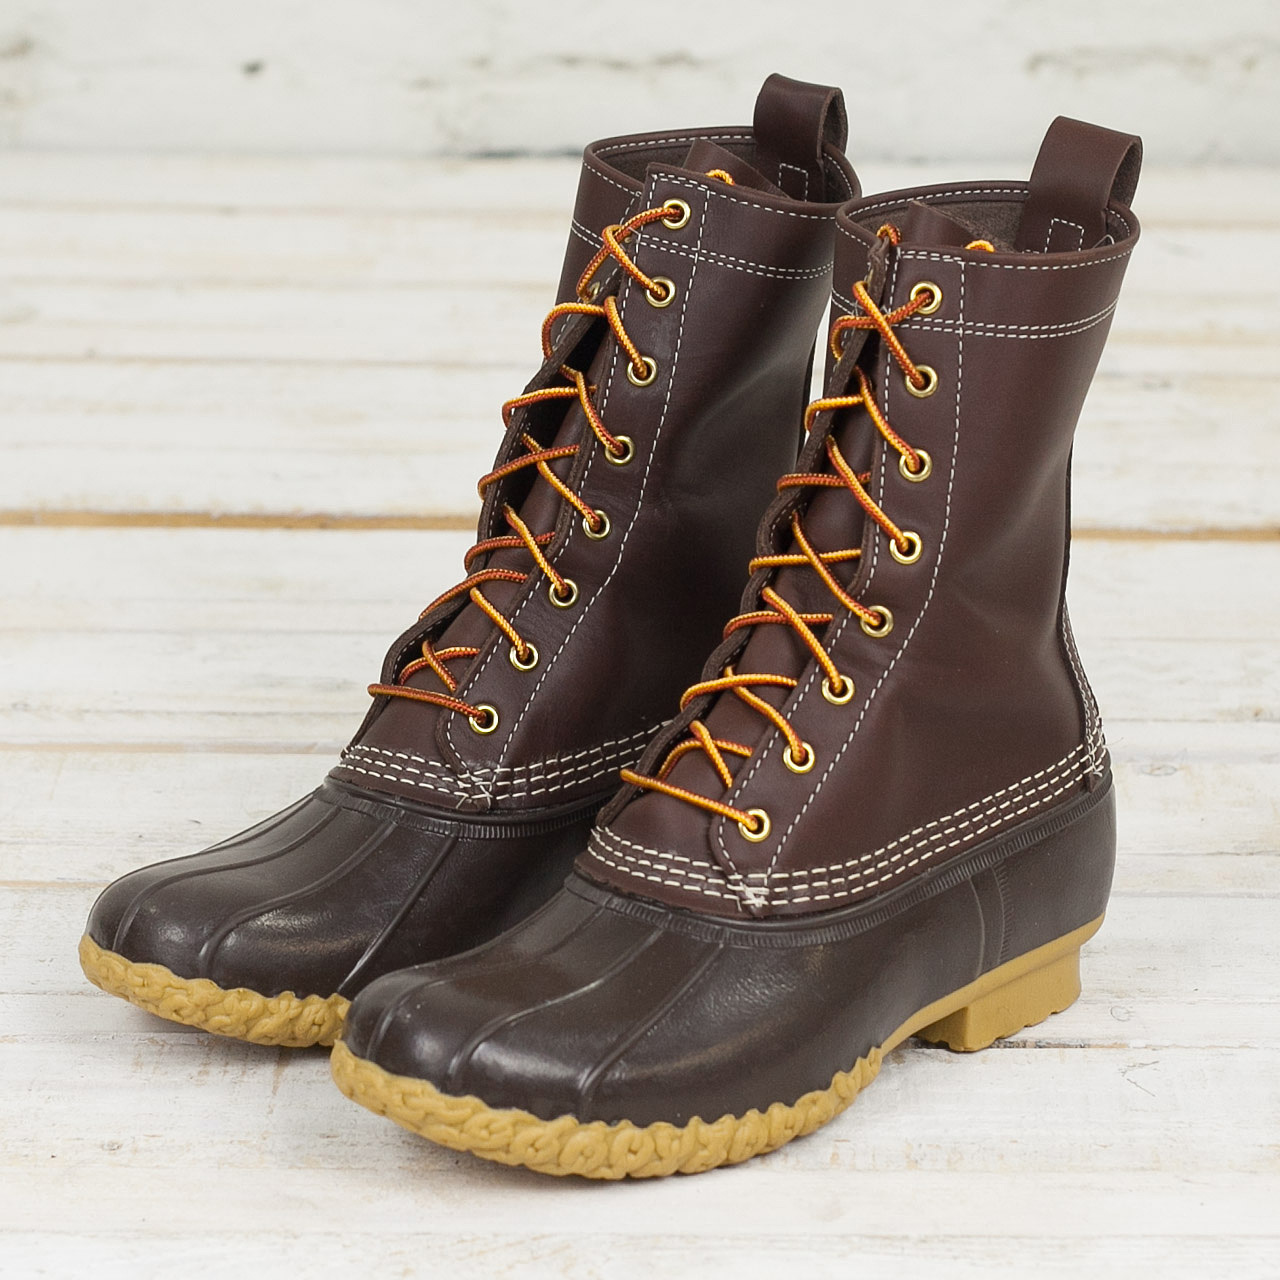 LL Bean Boots - recoveryparade-japan.com